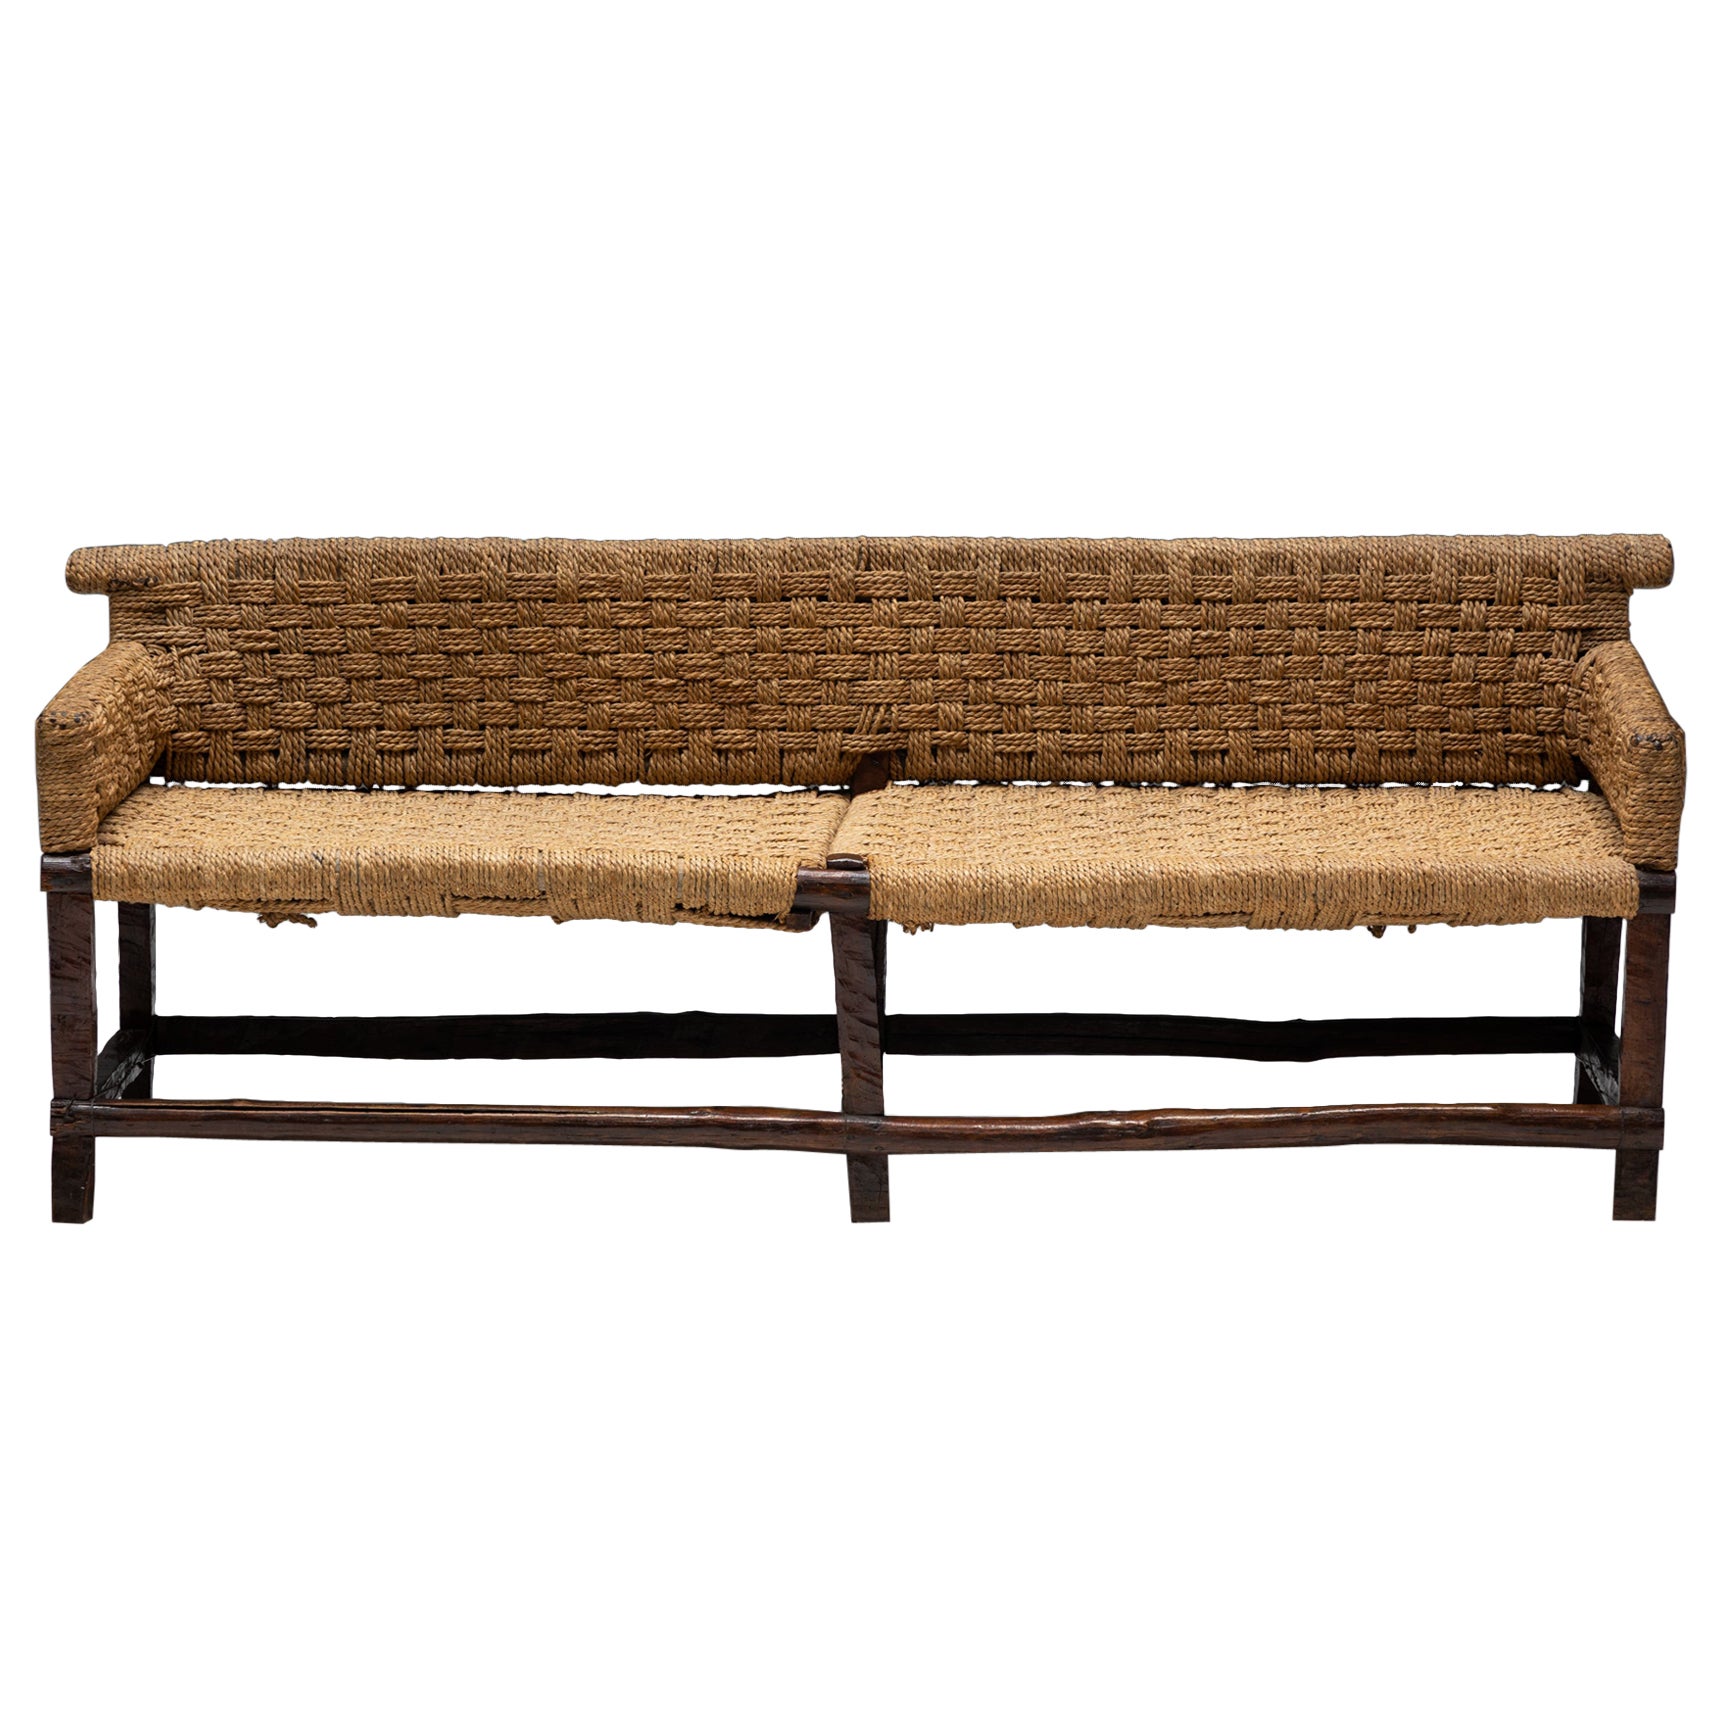 Naive Folk Art Bench with Woven Seating, 1920s